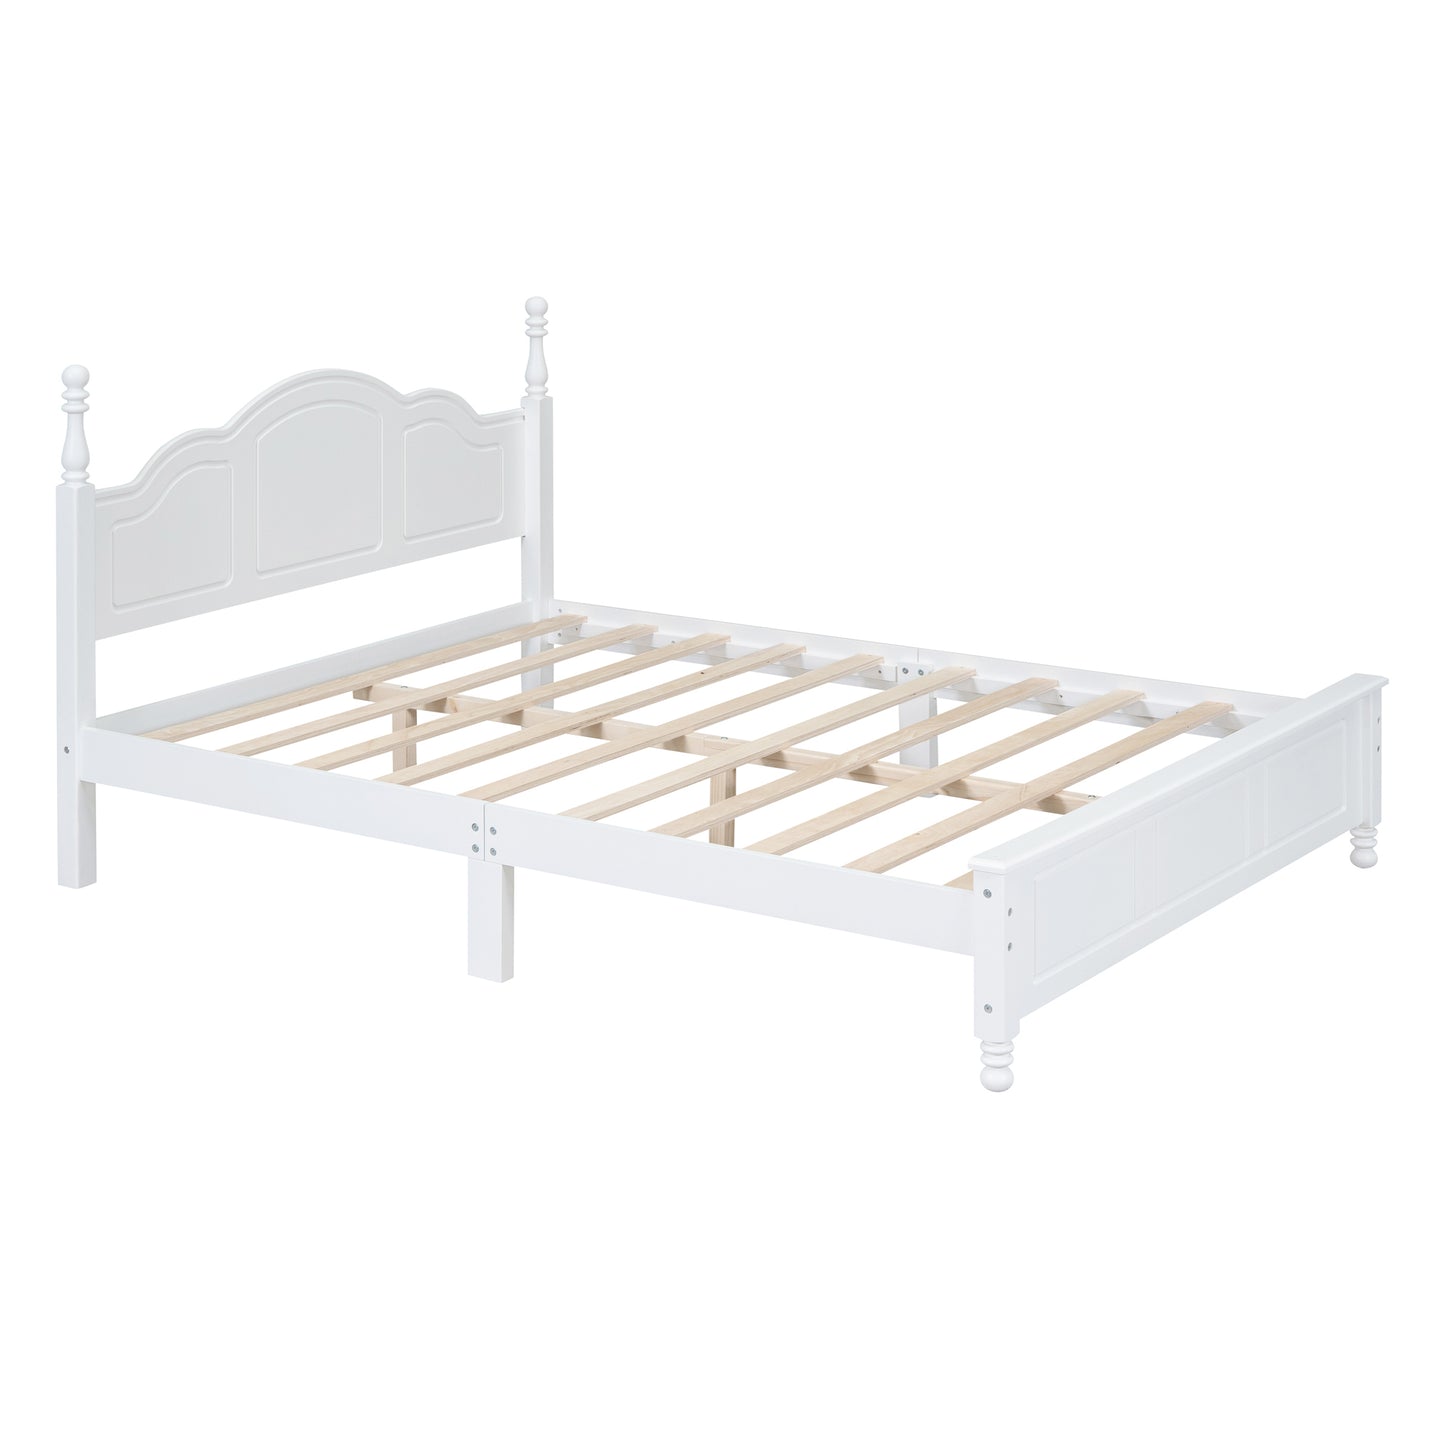 Queen Size Wood Platform Bed Frame,Retro Style Platform Bed with Wooden Slat Support,White